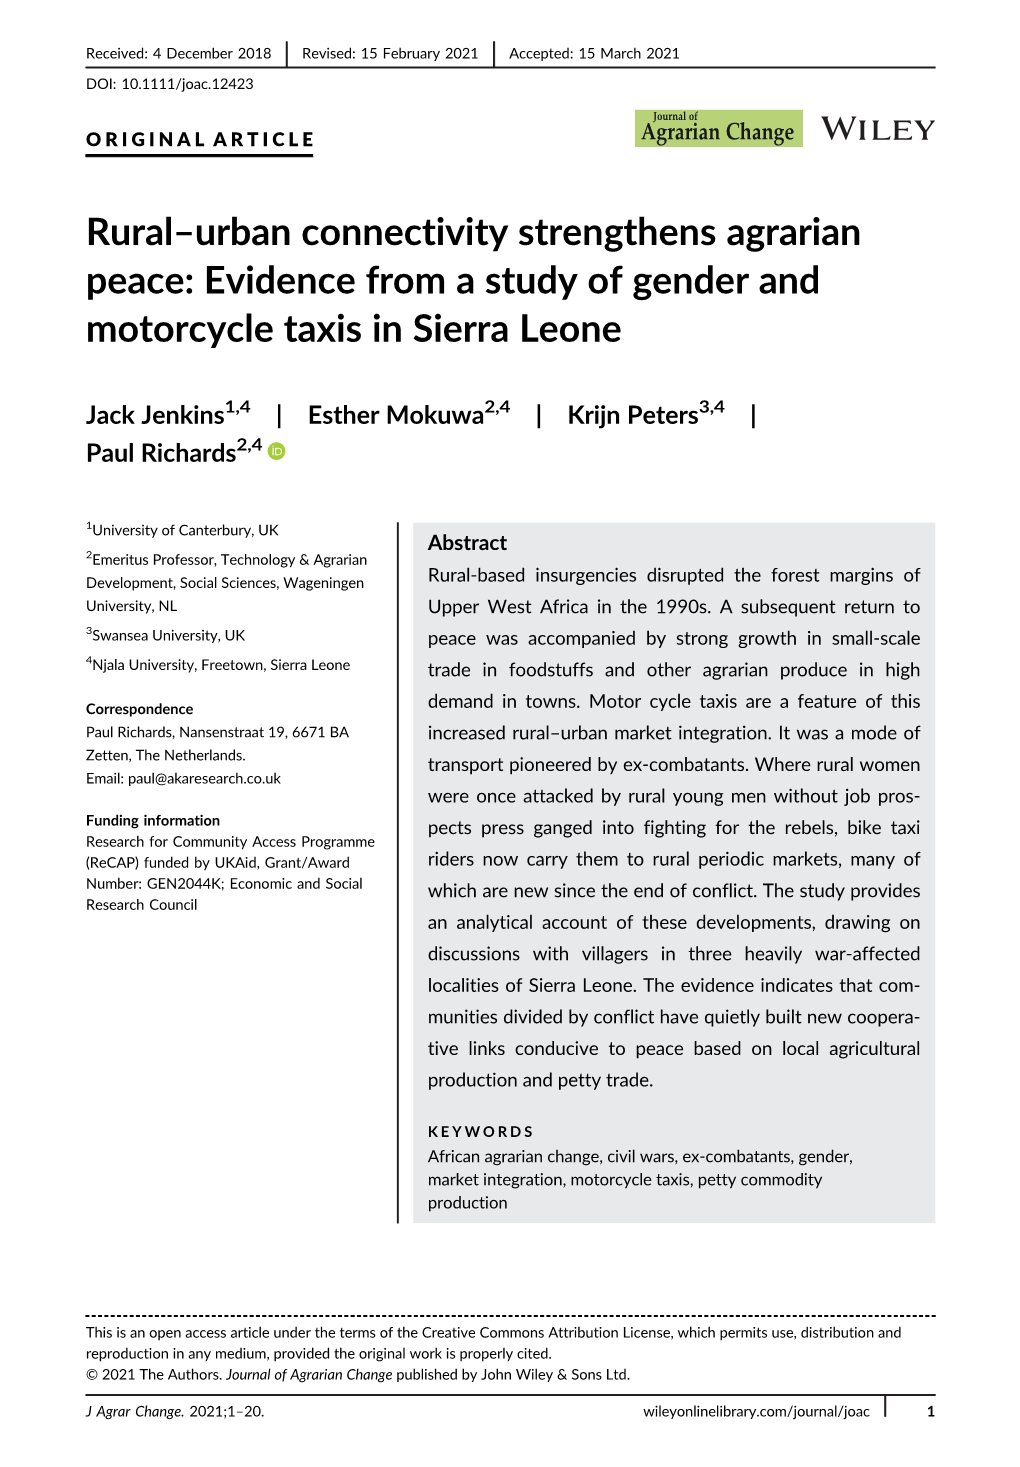 Evidence from a Study of Gender and Motorcycle Taxis in Sierra Leone